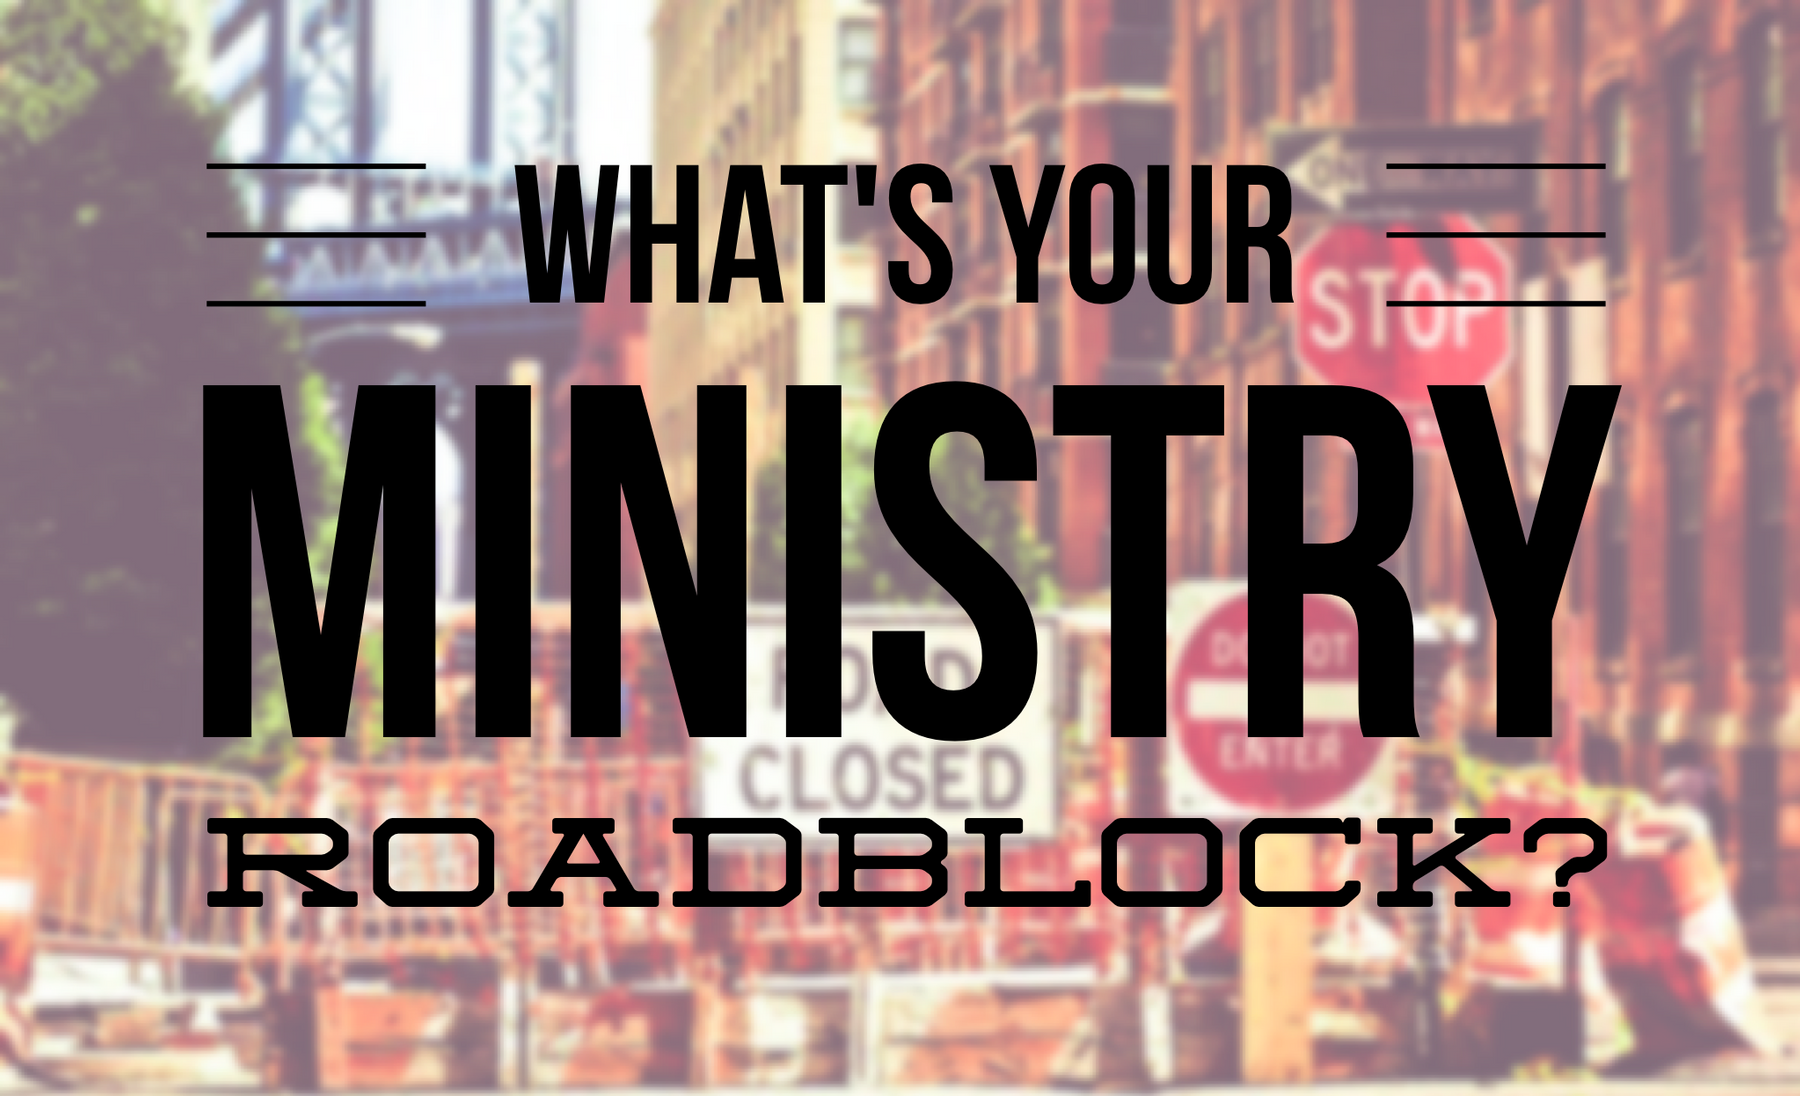 The Most Significant Roadblock To Your Effectiveness As A Youth Minister